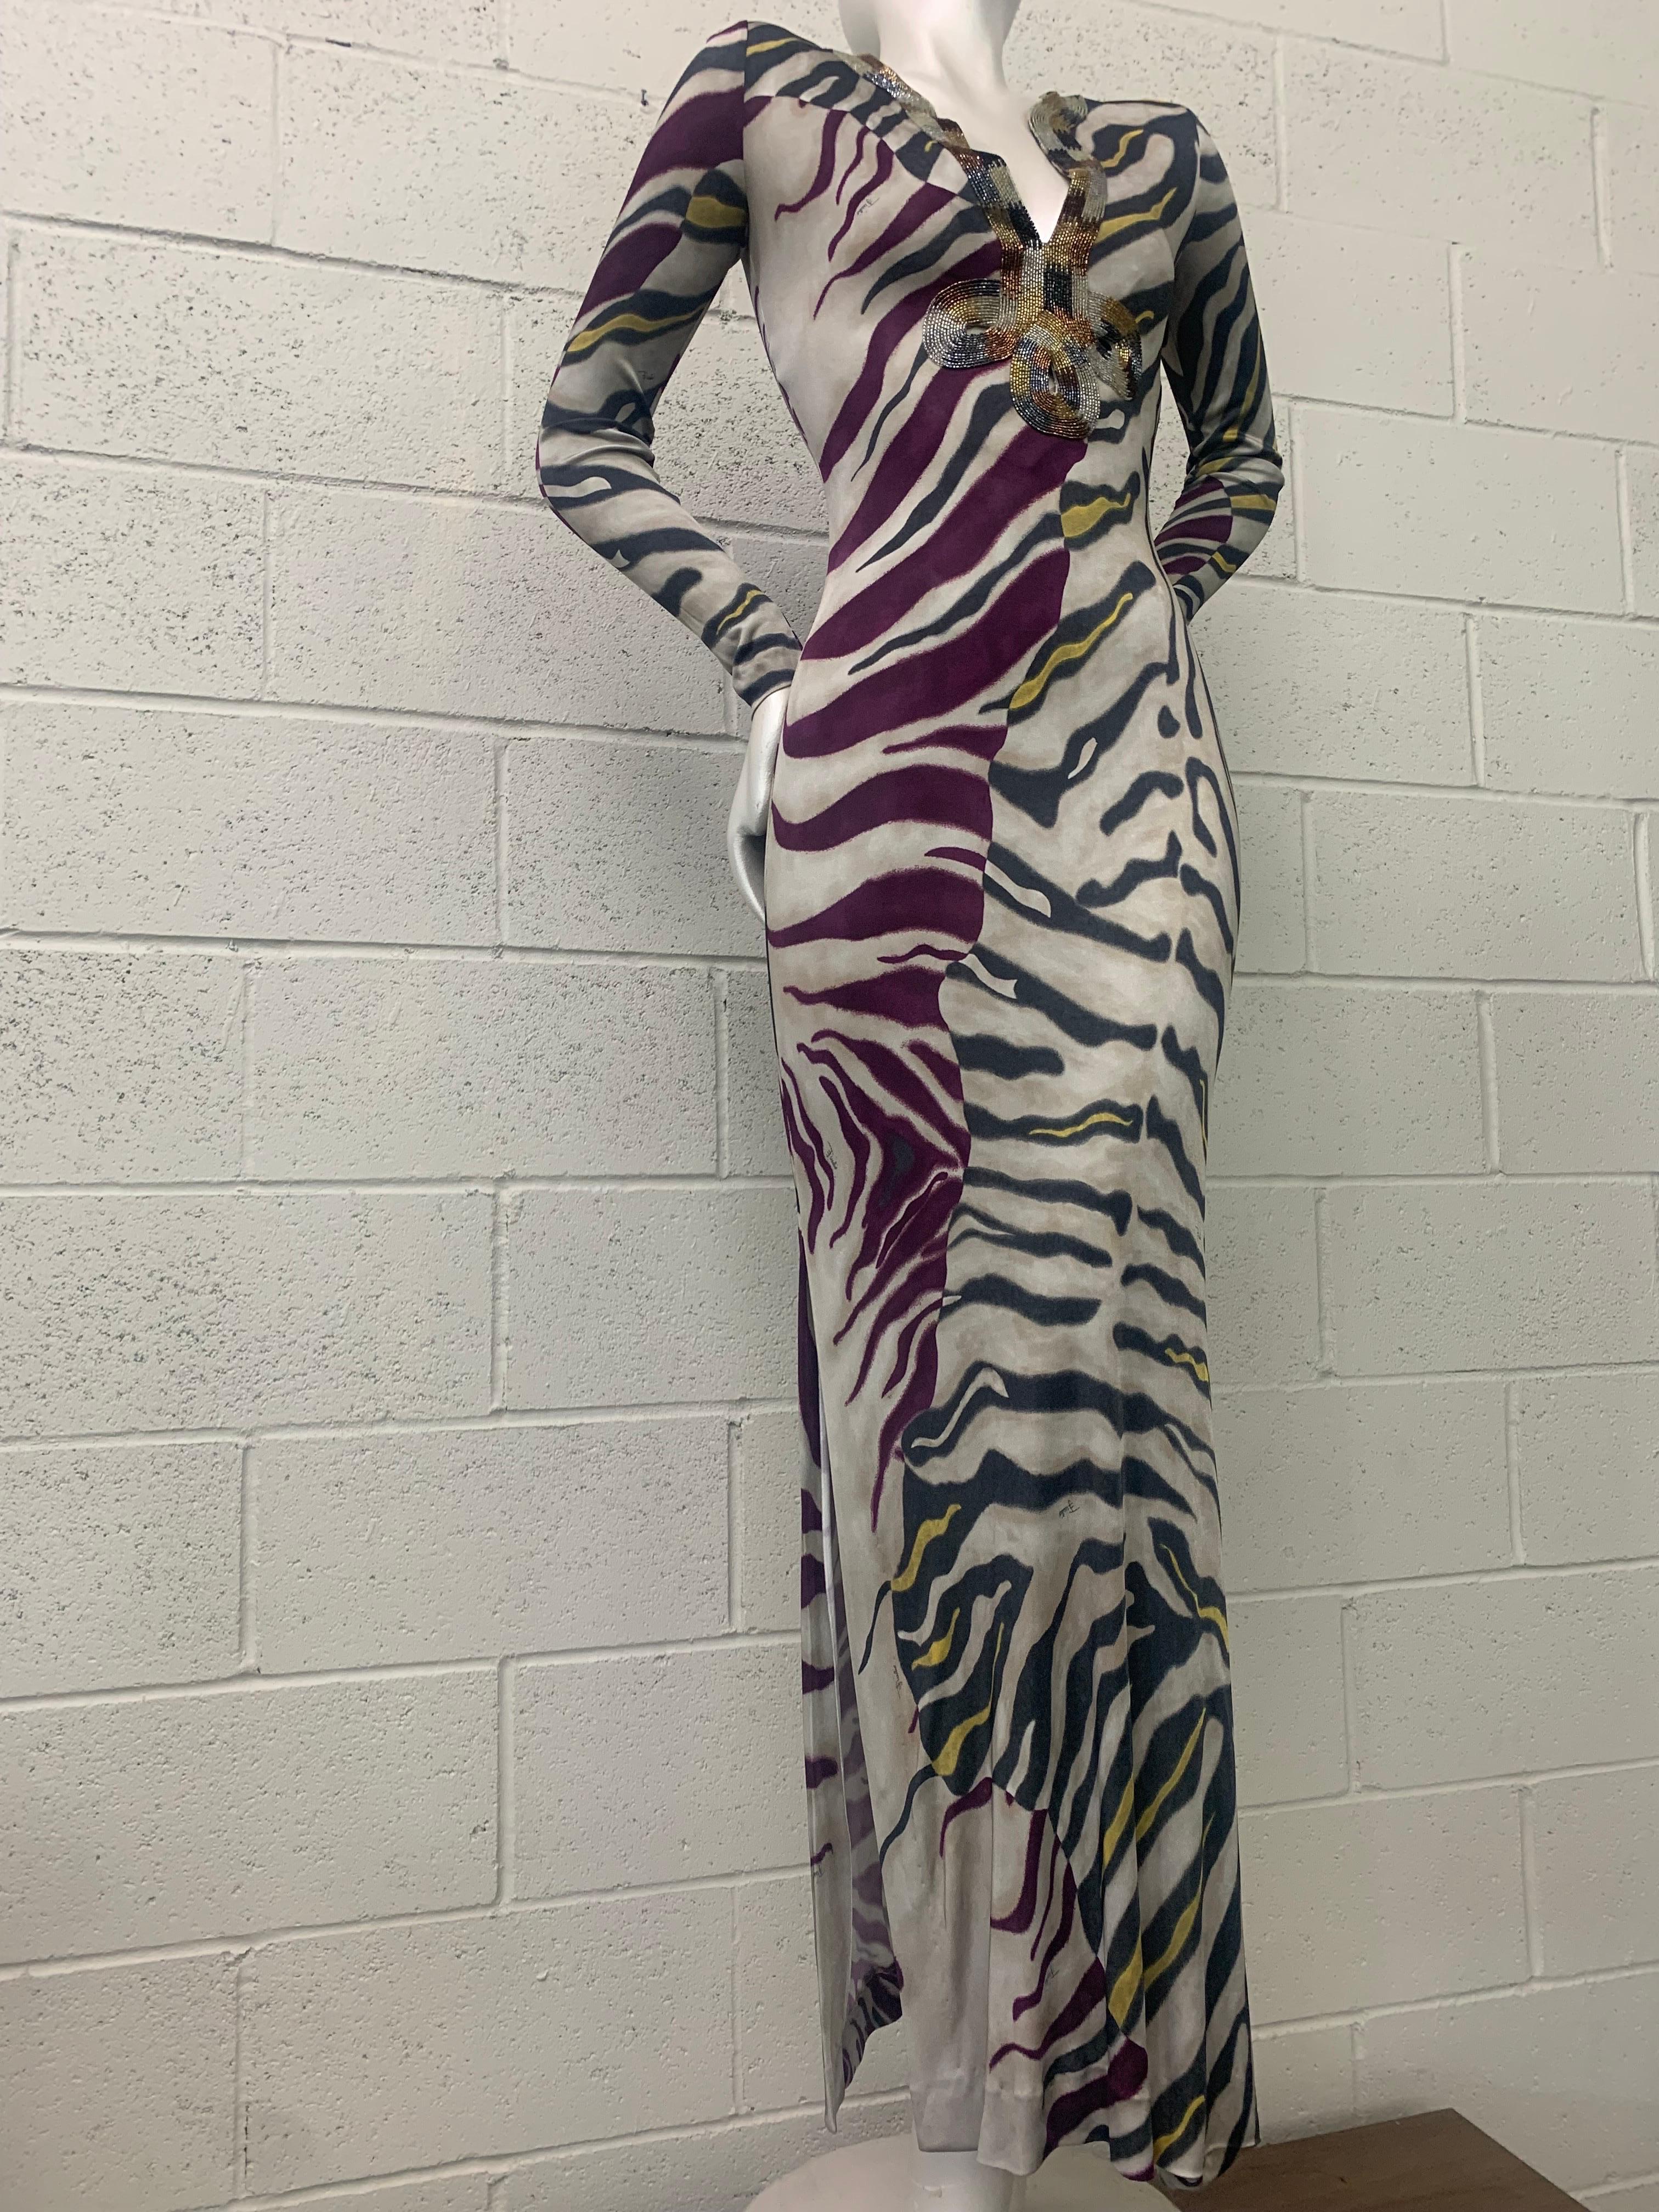 Emilio Pucci Stylized Zebra-Print Body-Conscious Beaded Maxi Dress in Rayon Knit For Sale 4